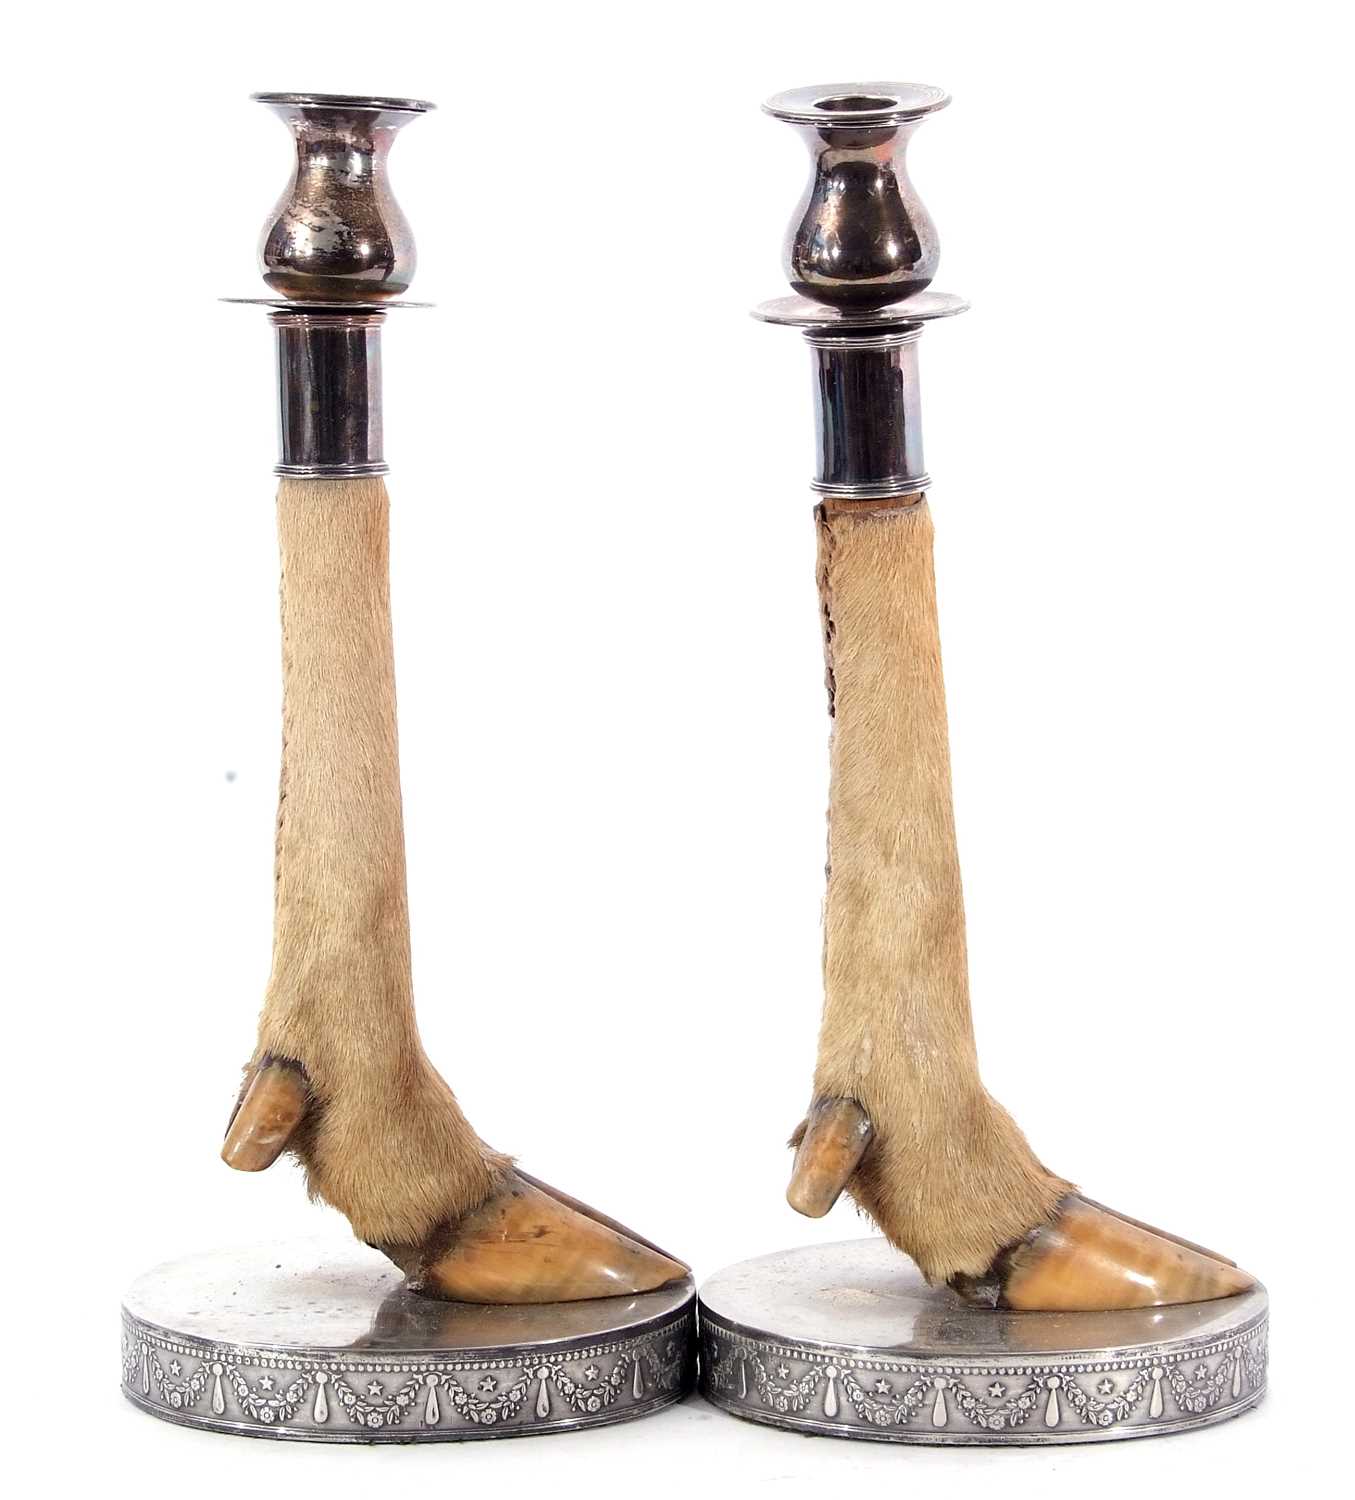 Pair of early 20th century novelty candlesticks, silver plated nozzles and mounts on the lower leg - Image 2 of 4